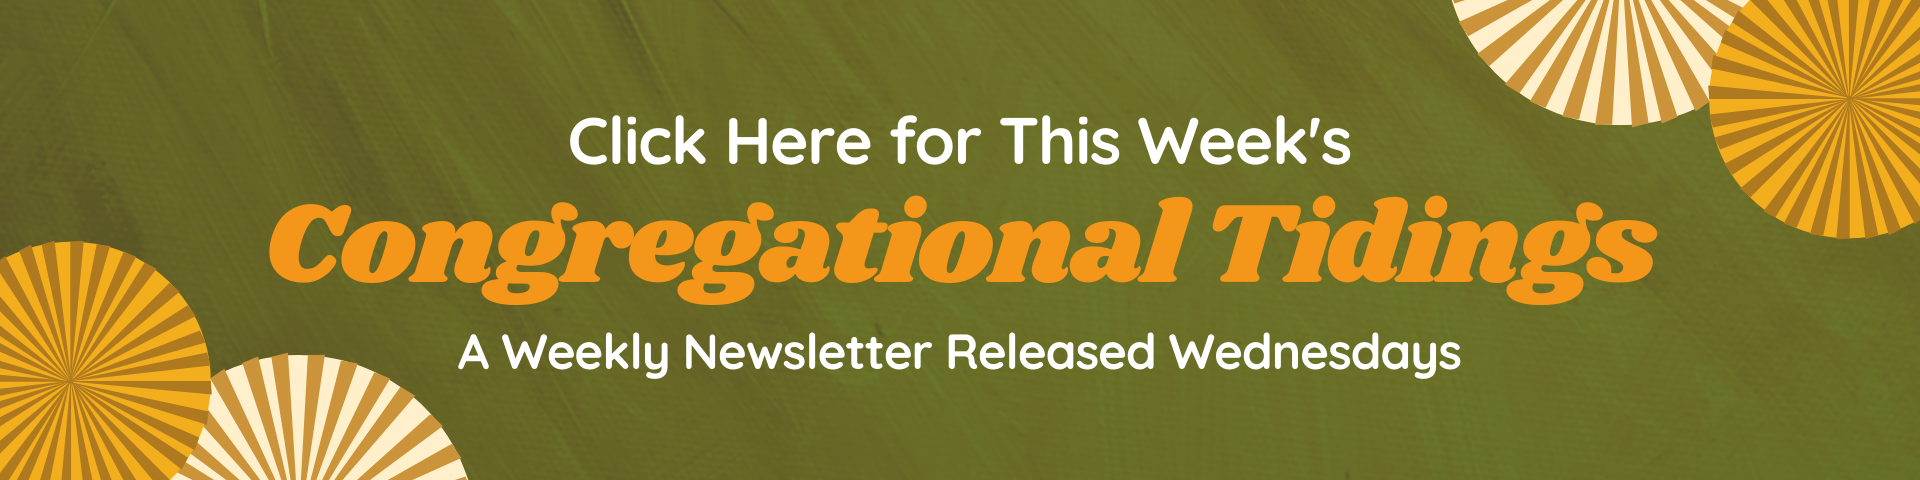 Click Here for This Weeks Congregational Tidings: A Weekly Newsletter Released Wednesdays